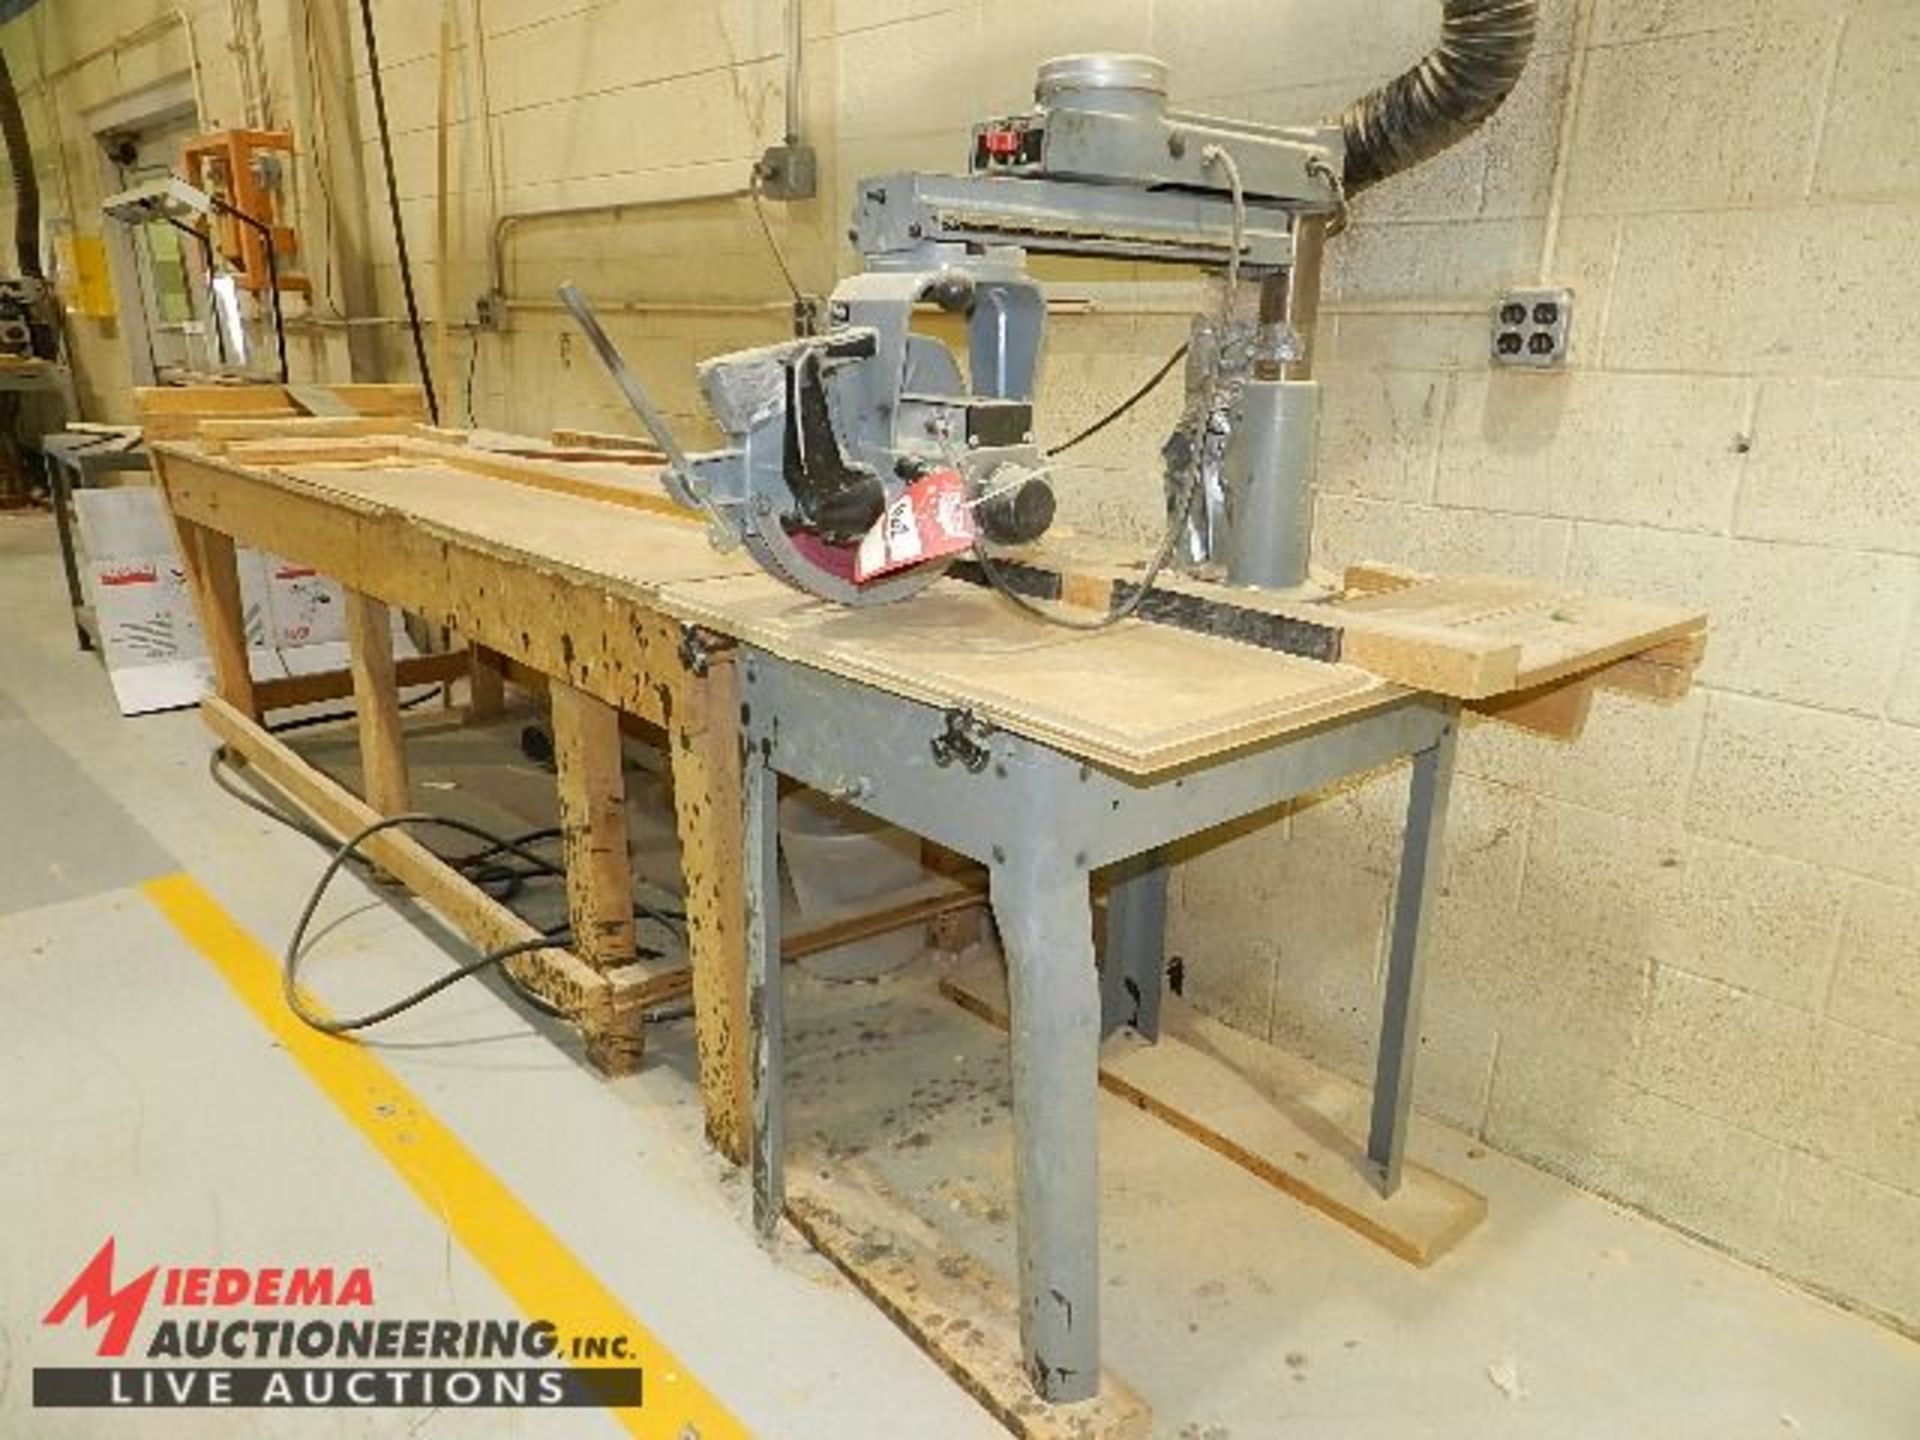 DELTA 438-02-314-2067 10" RADIAL ARM SAW, 2 HP, 230 VOLT, SINGLE PHASE, INCLUDES STAND AND WOOD